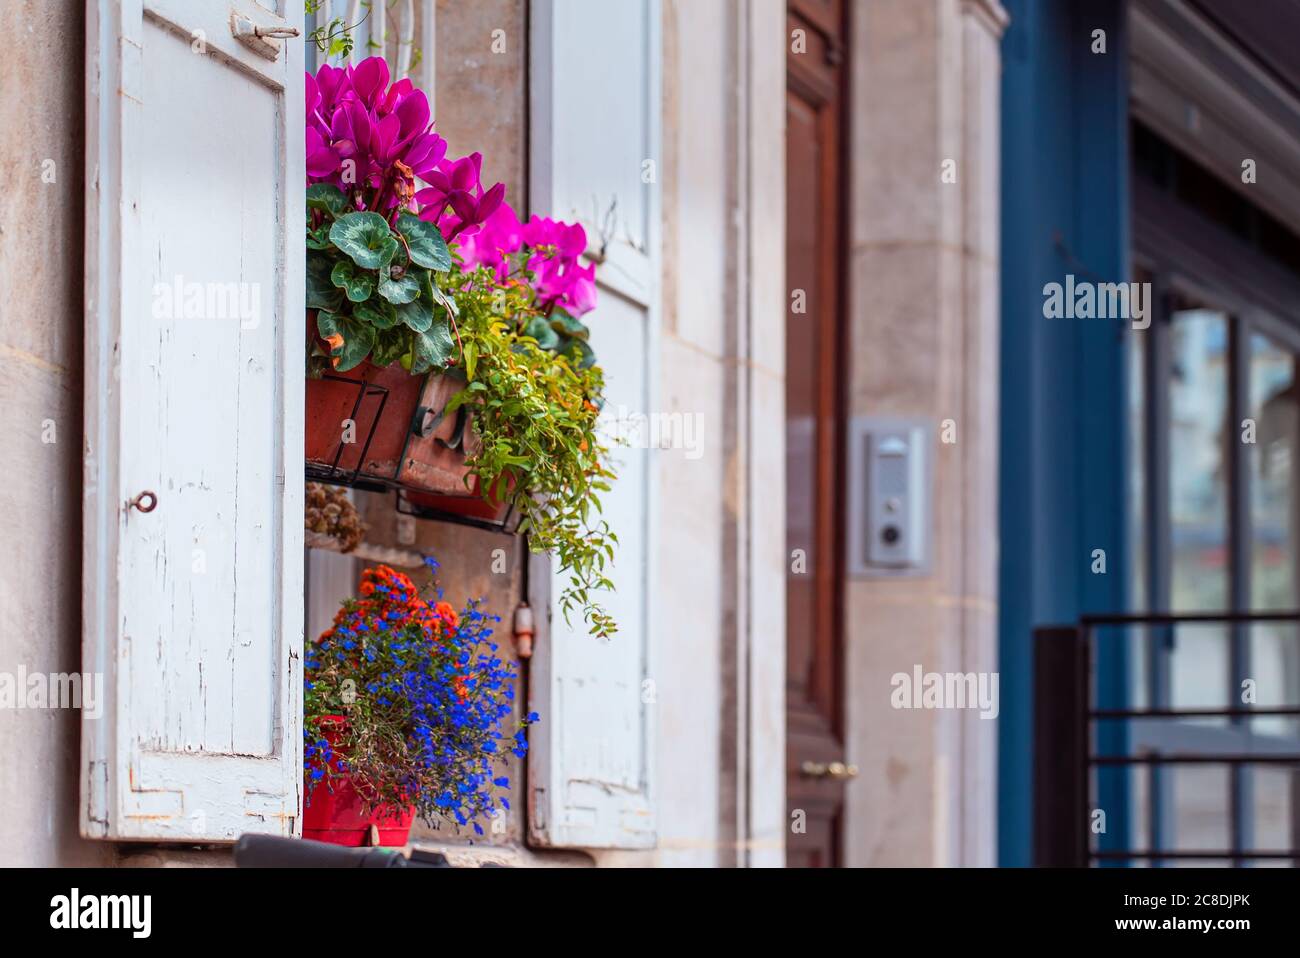 Flowers on windows with shutters of old buildings on Montmartre, Paris. Autumn in France, old town Stock Photo